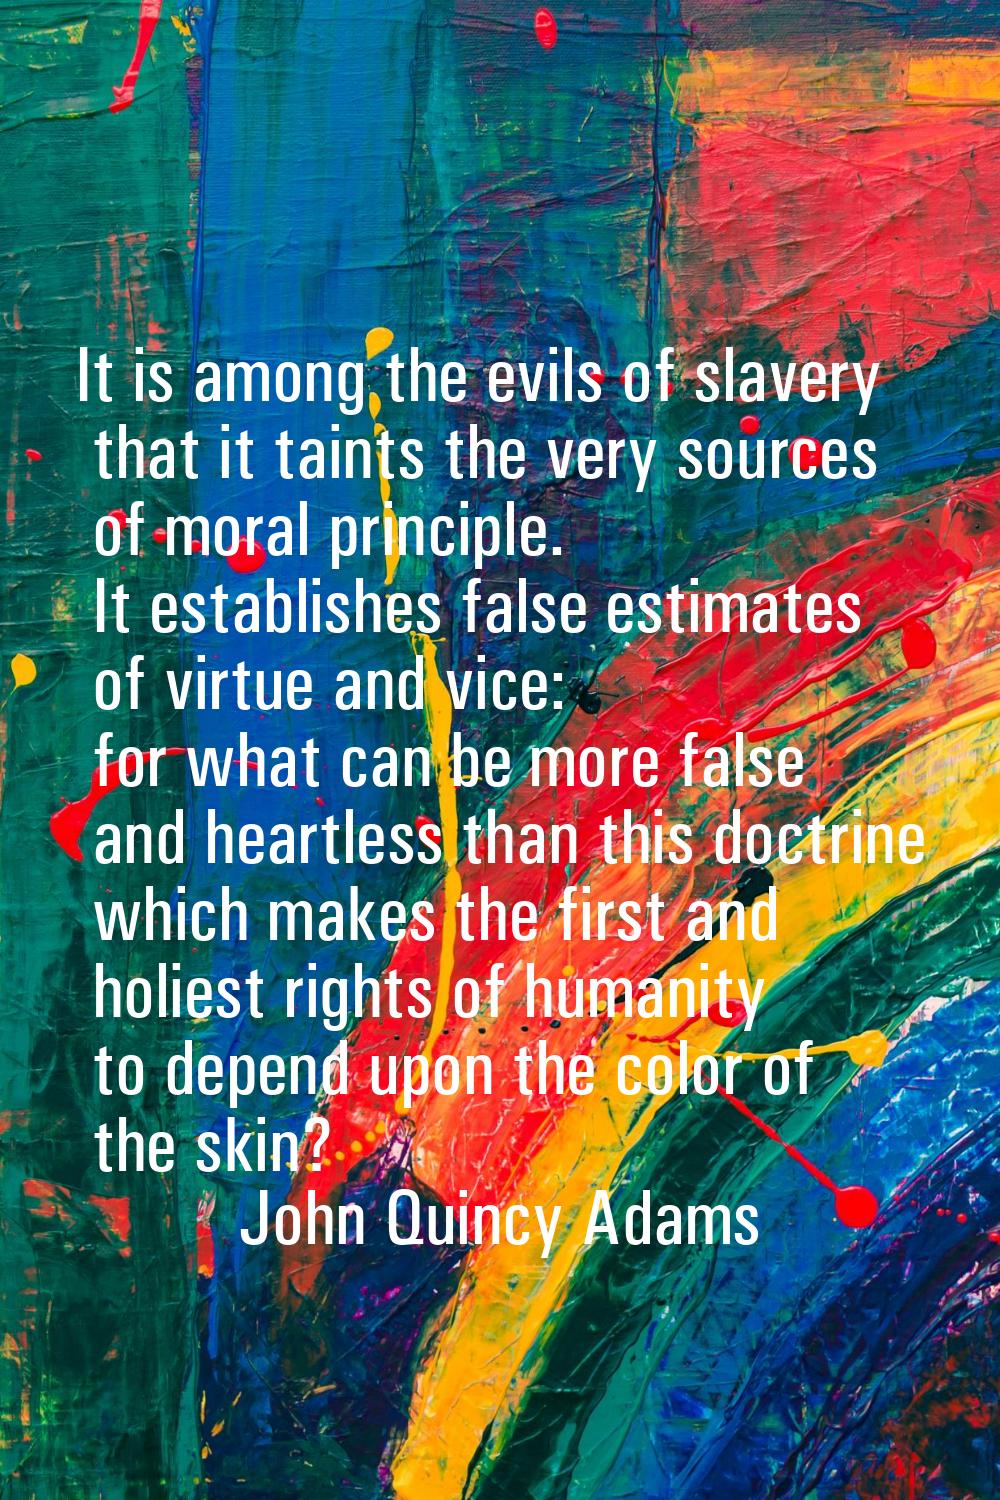 It is among the evils of slavery that it taints the very sources of moral principle. It establishes